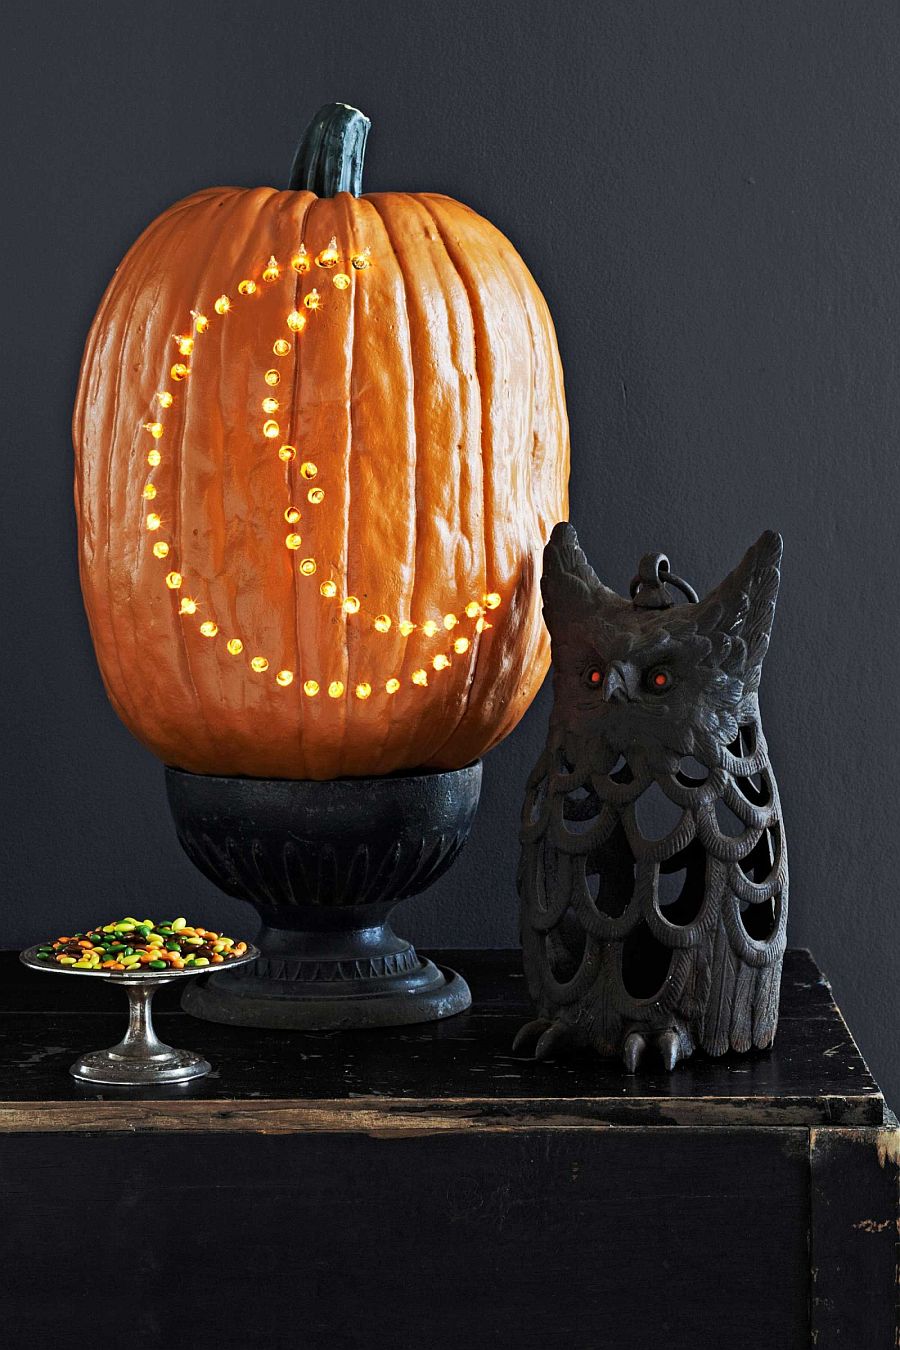 Crescent moon pumpkin allows you to light up your home in style this Halloween [From: The Garden Love]